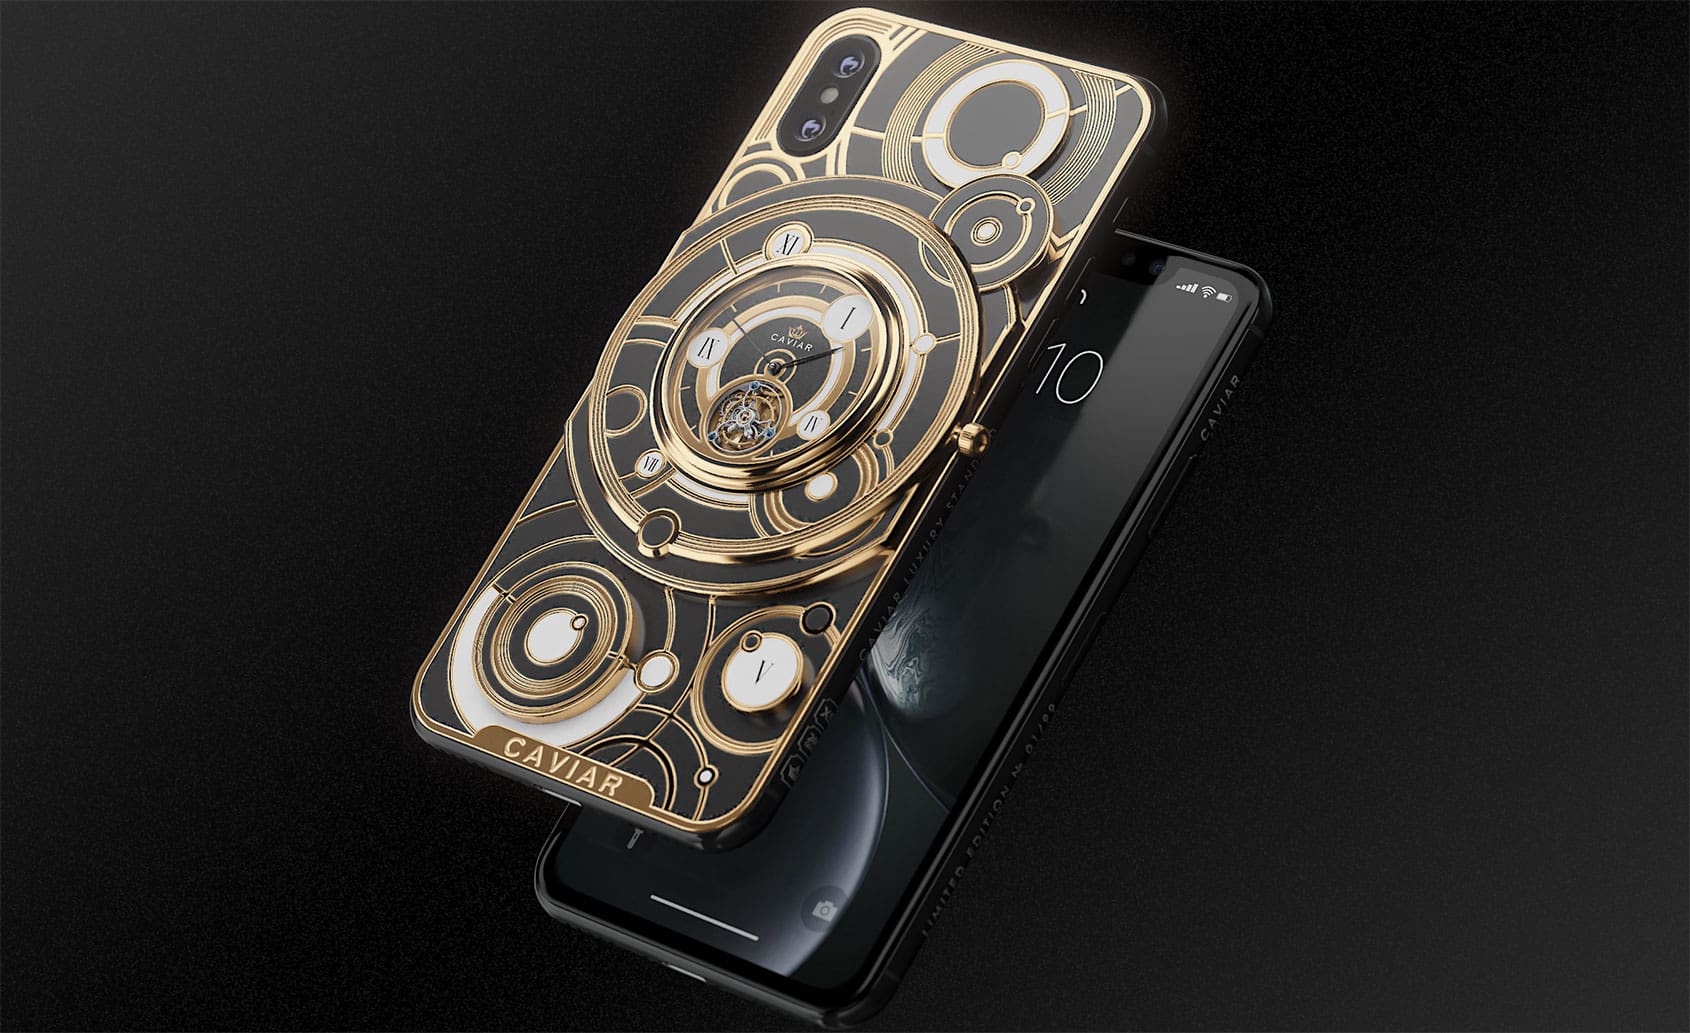 NEWS: Peak ridiculousness achieved with the unholy fusion of iPhone and tourbillon